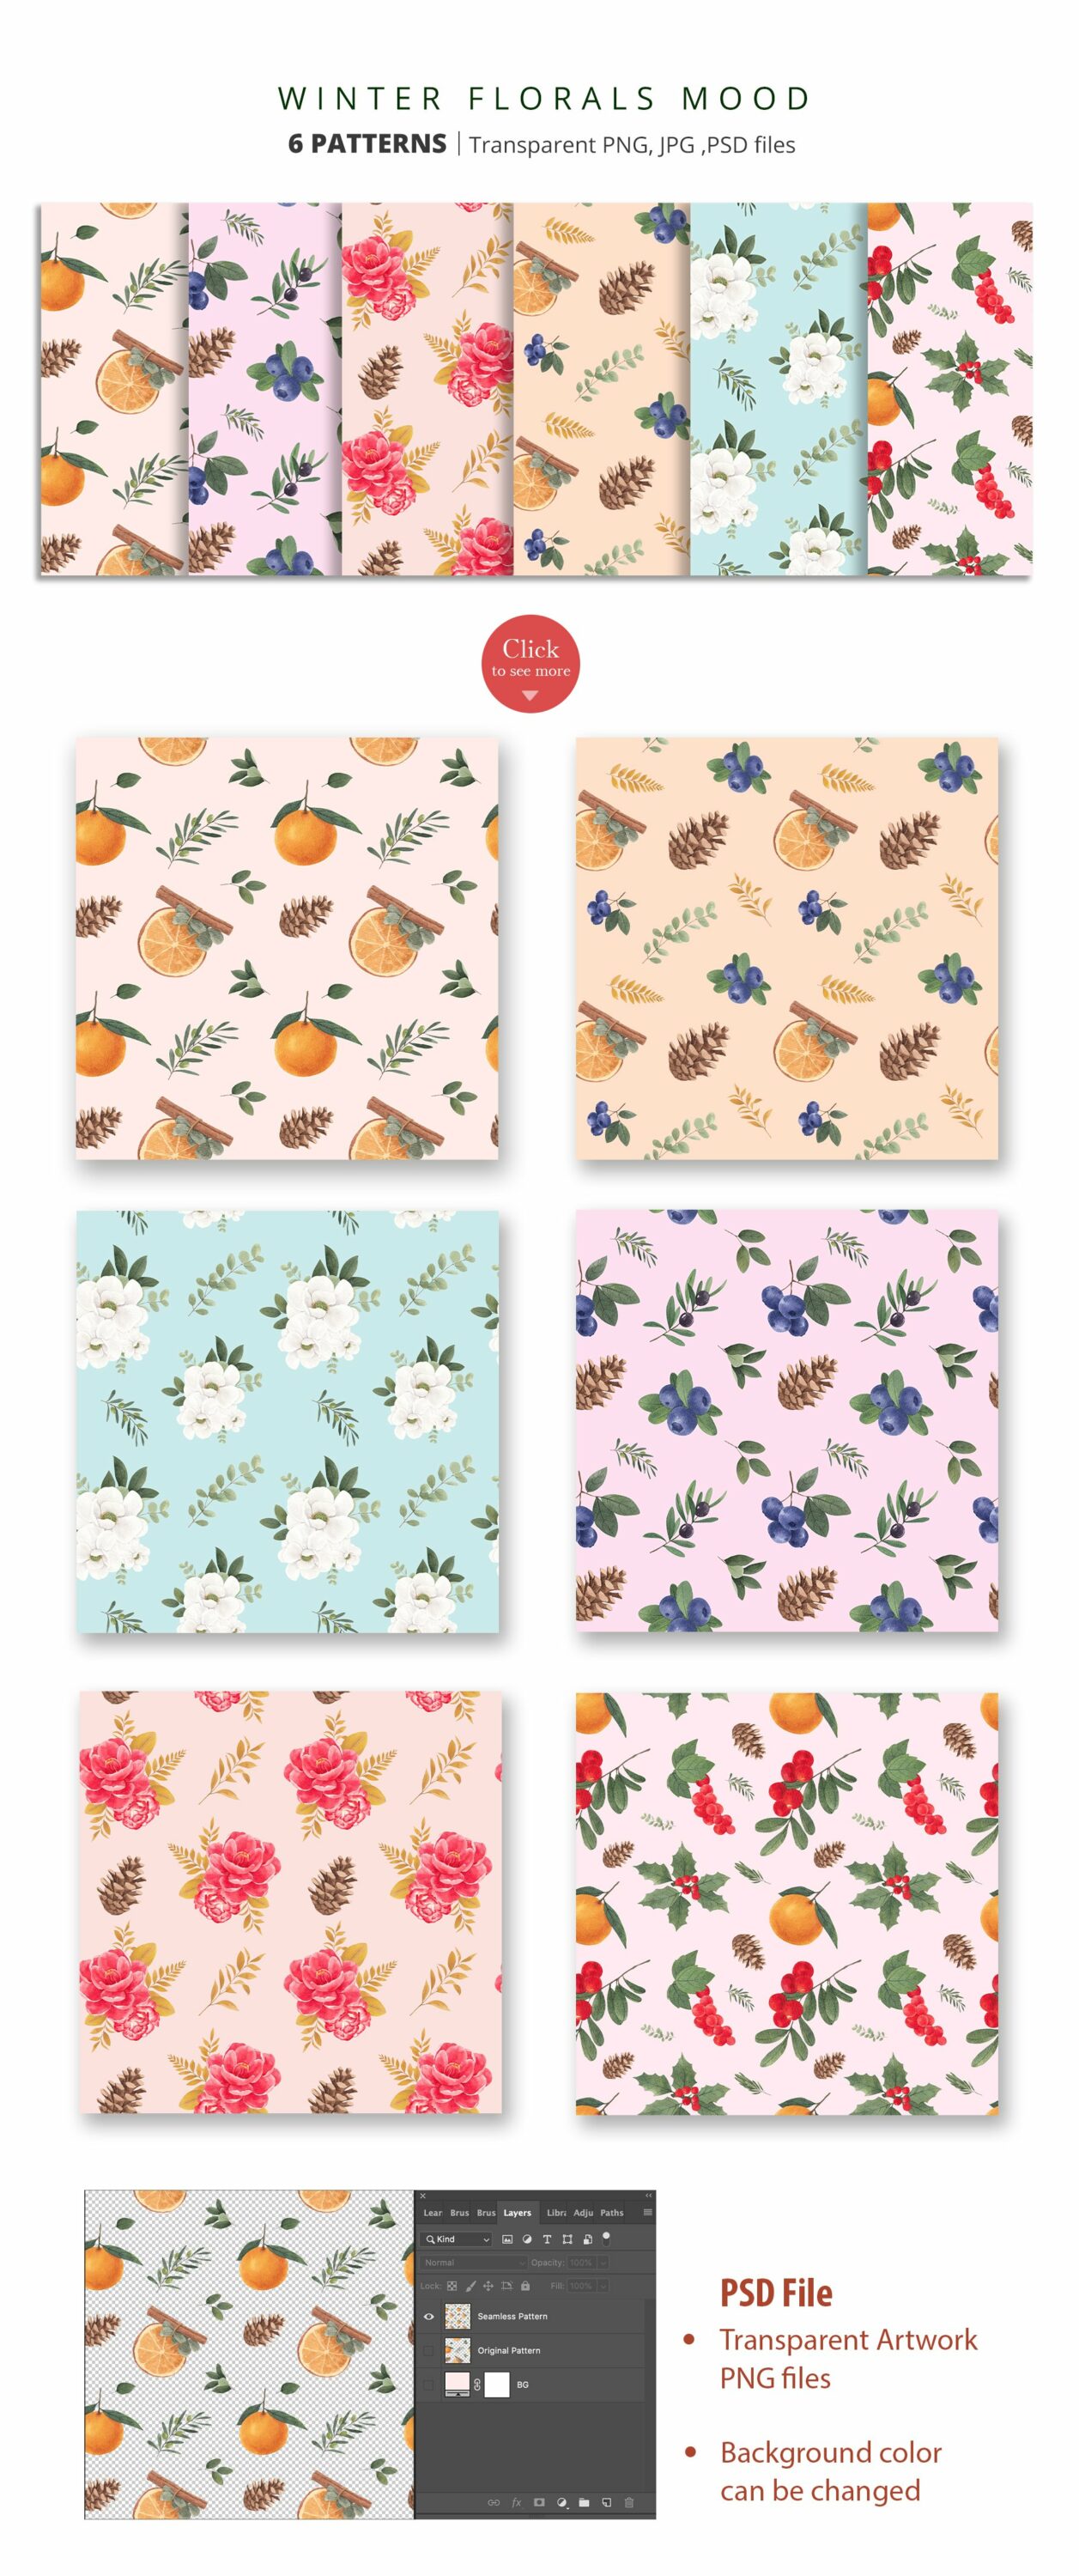 Winter florals mood pattern for different purposes.